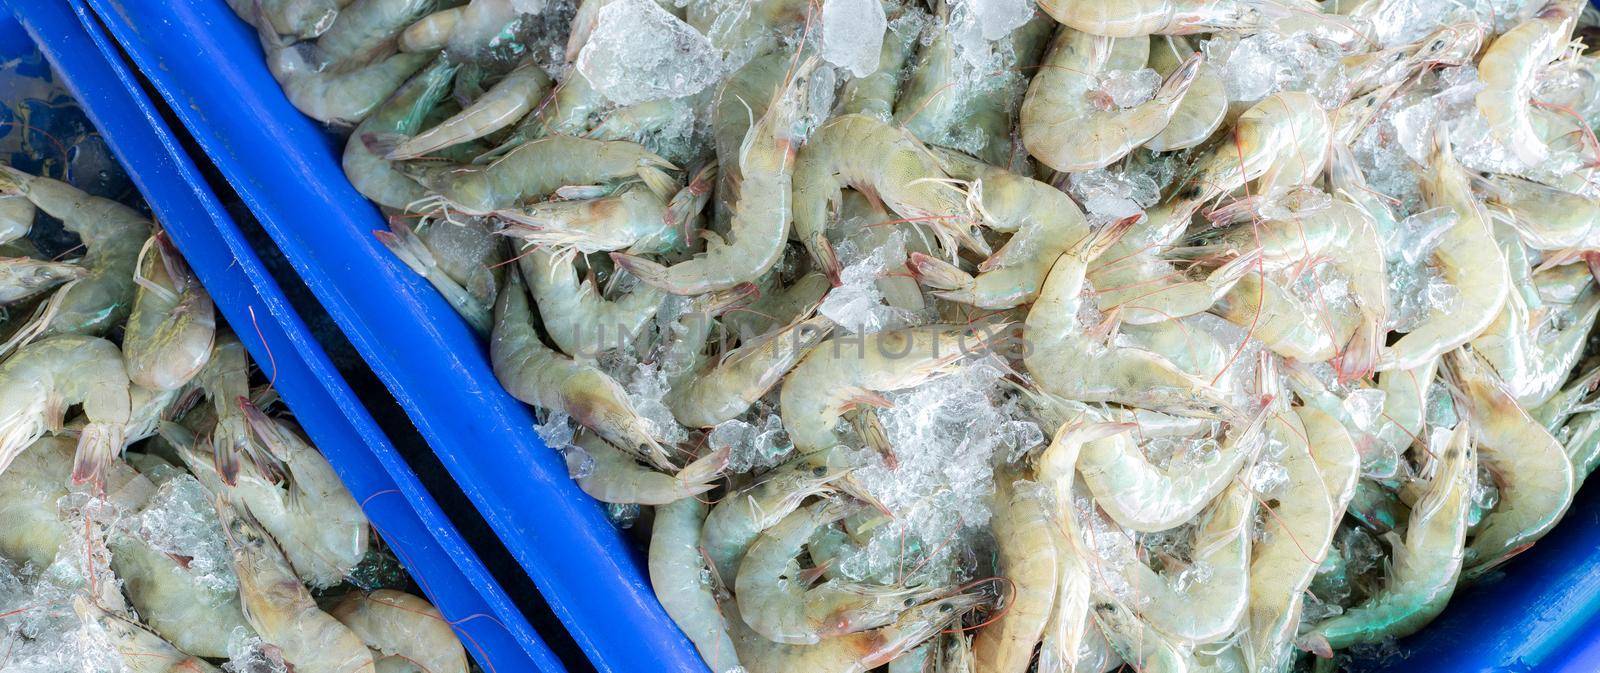 Fresh white shrimps on crushed ice for sale in market. Raw prawns for cooking in seafood restaurant. Sea food industry. Shellfish animal. Shrimp market. Uncooked prawn. Shrimp for frozen food factory. by Fahroni